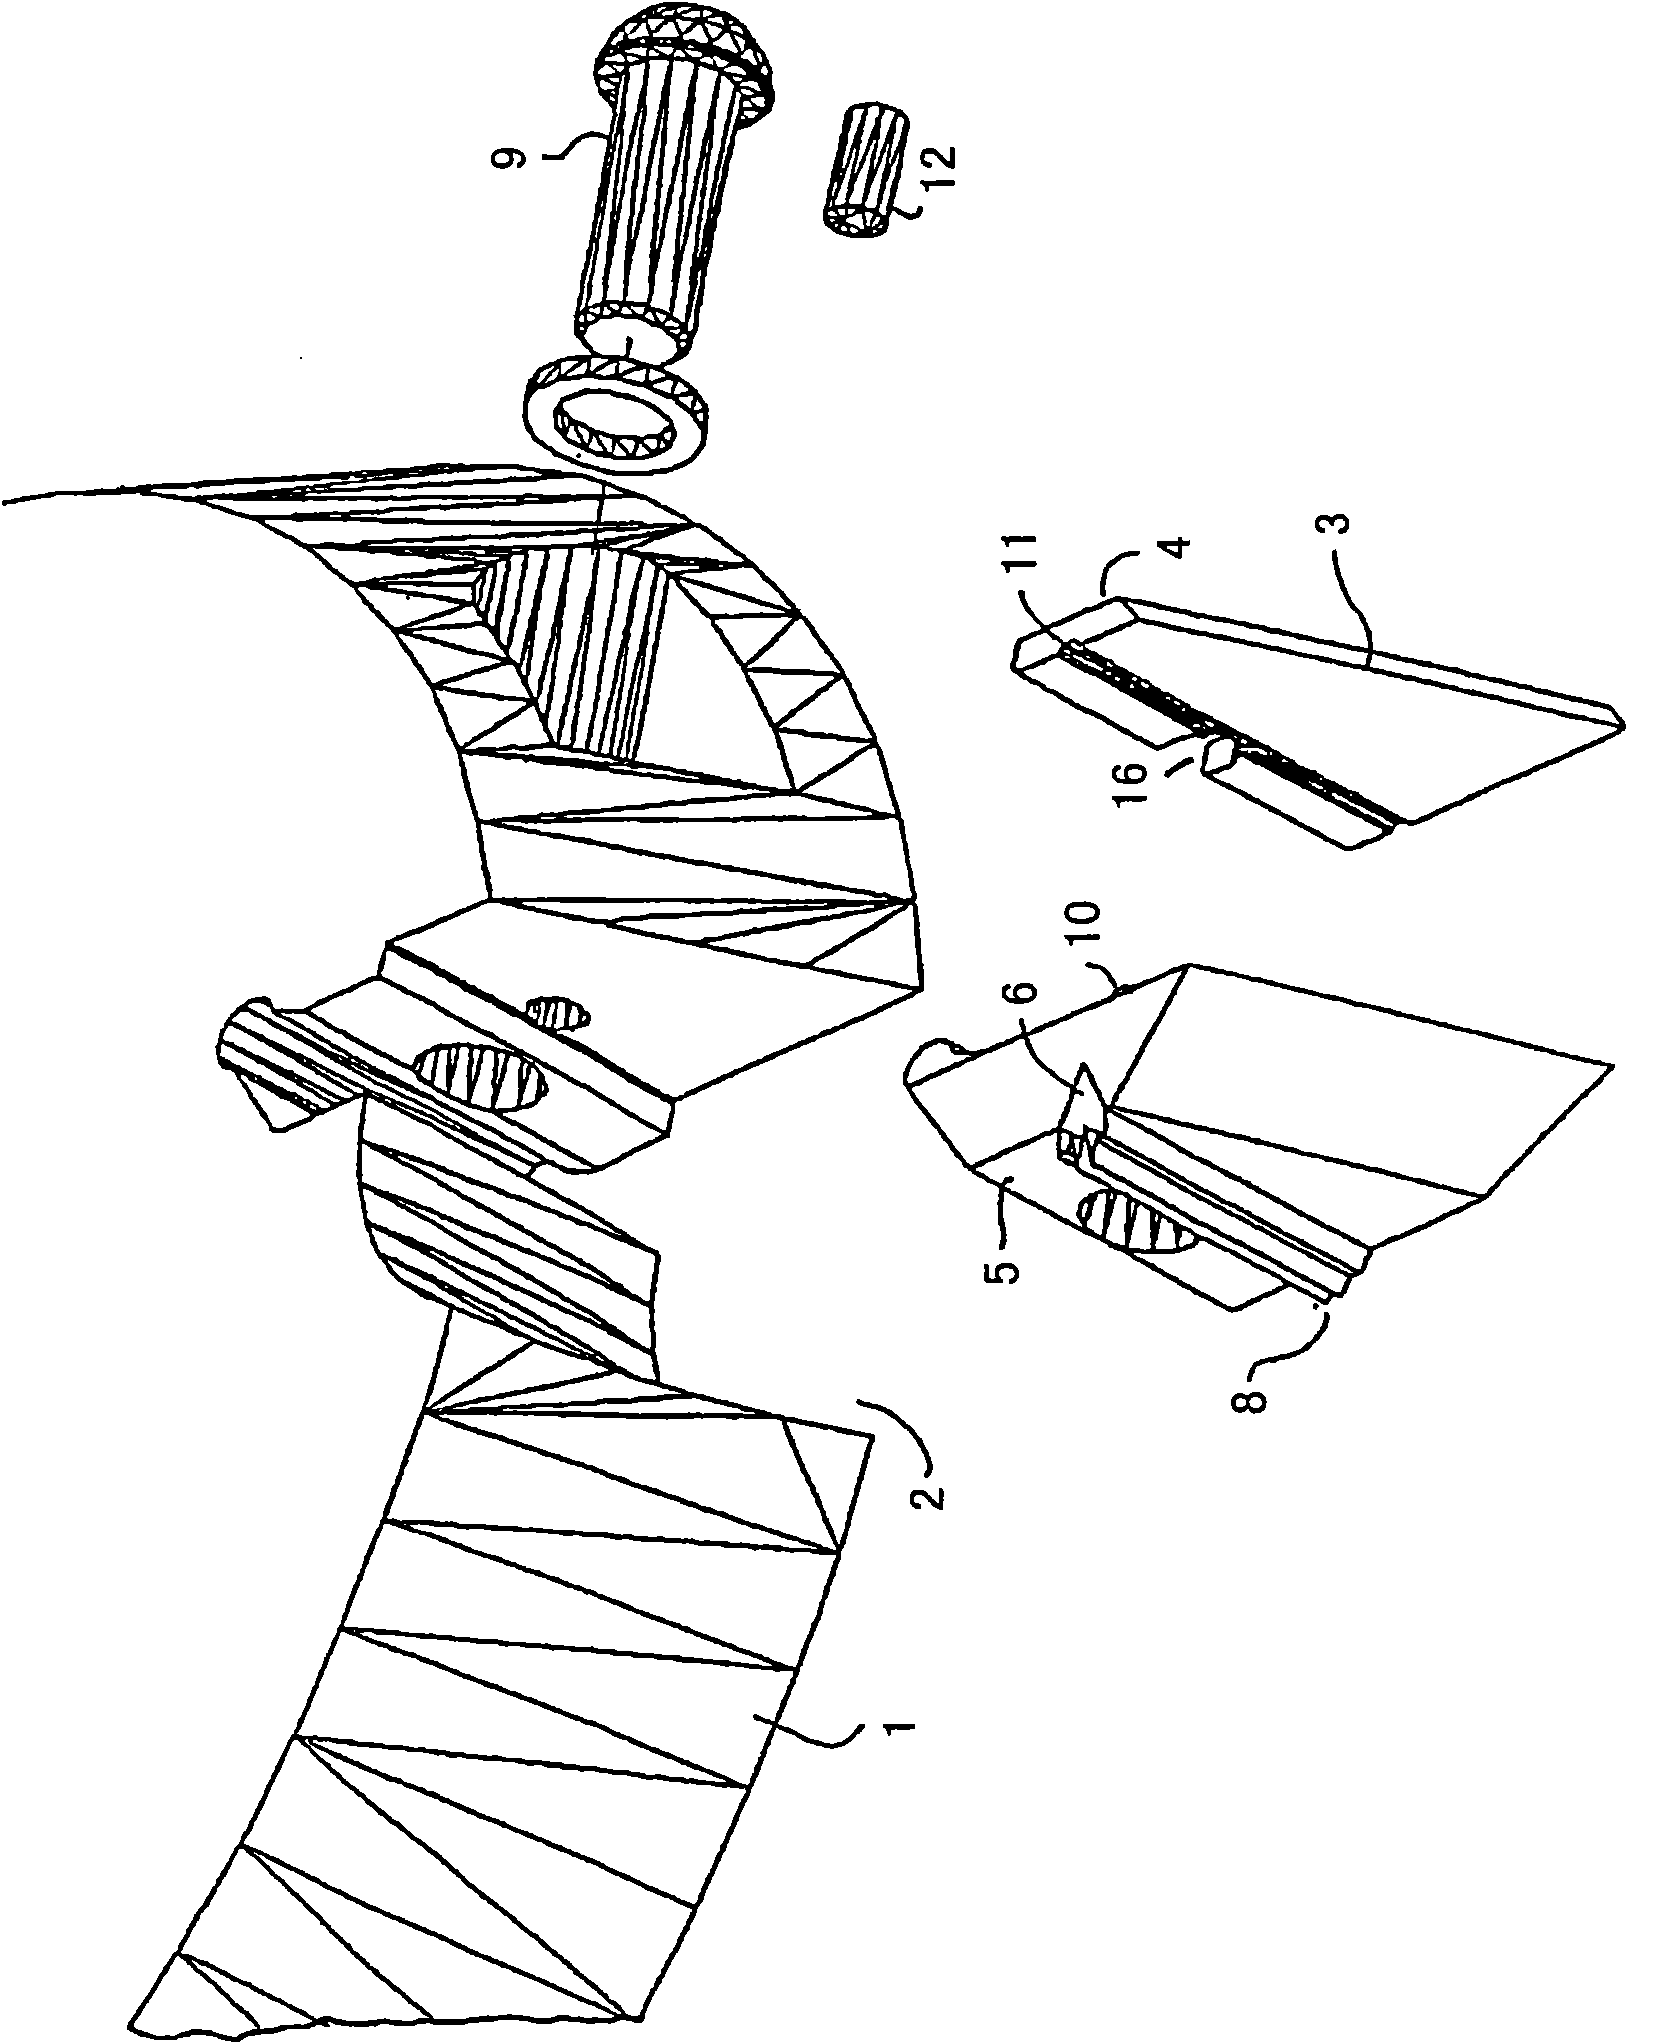 Cutting tool with a supporting body